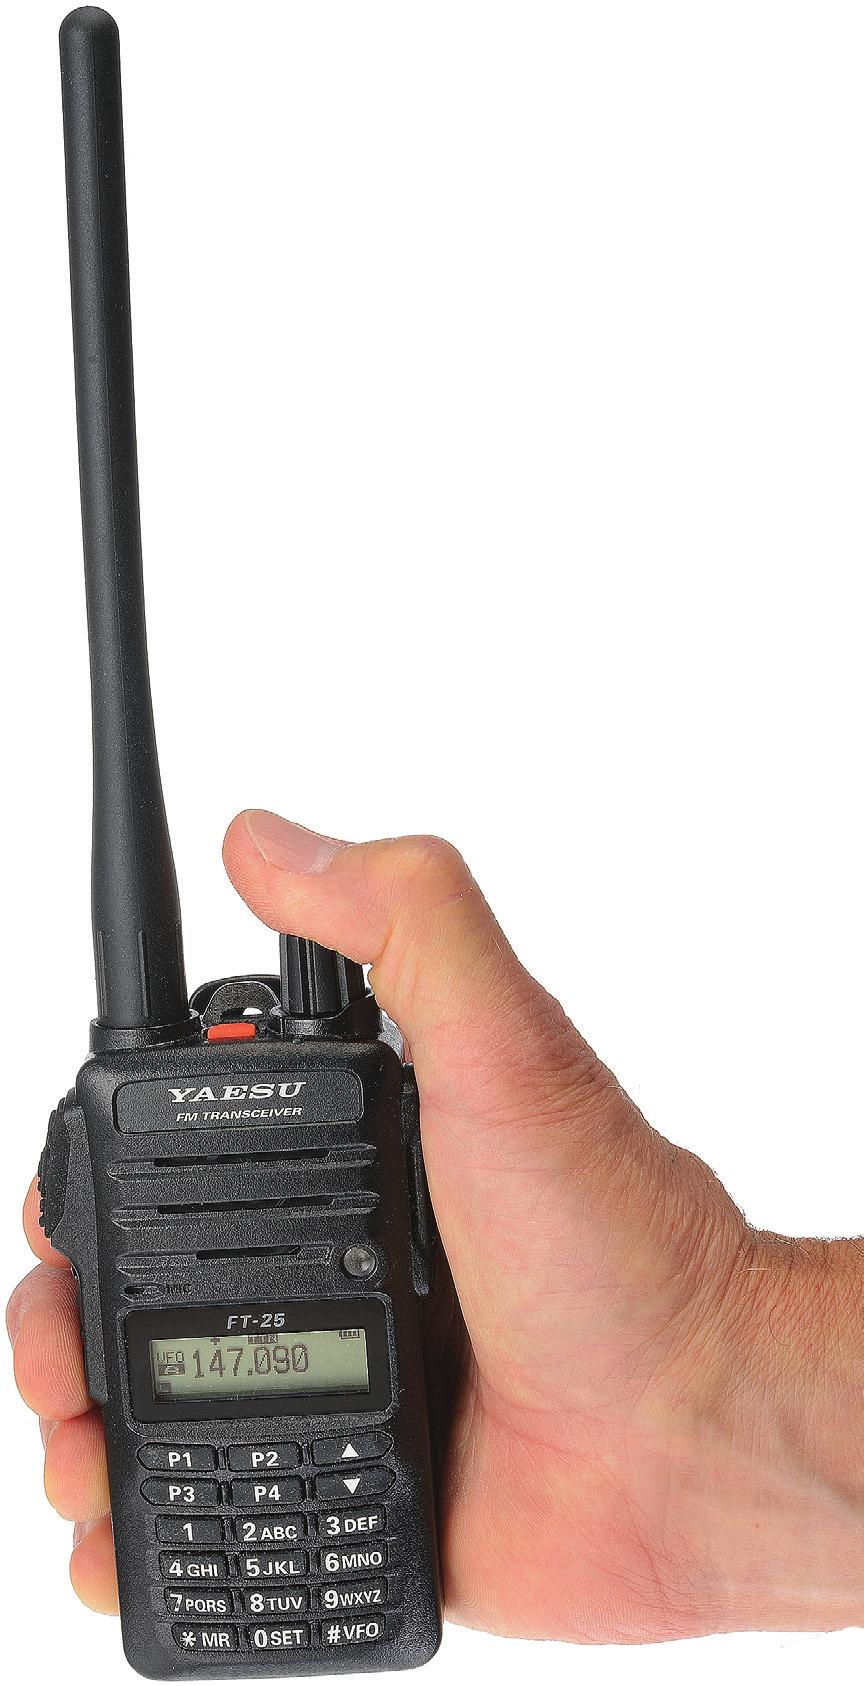 Yaesu FT-25R 2-Meter Handheld Transceiver Reviewed by Dan Wall, W1ZFG ARRL LoTW Administration w1zfg@arrl.org The latest entry into the field of small, inexpensive handhelds is the Yaesu FT-25R.